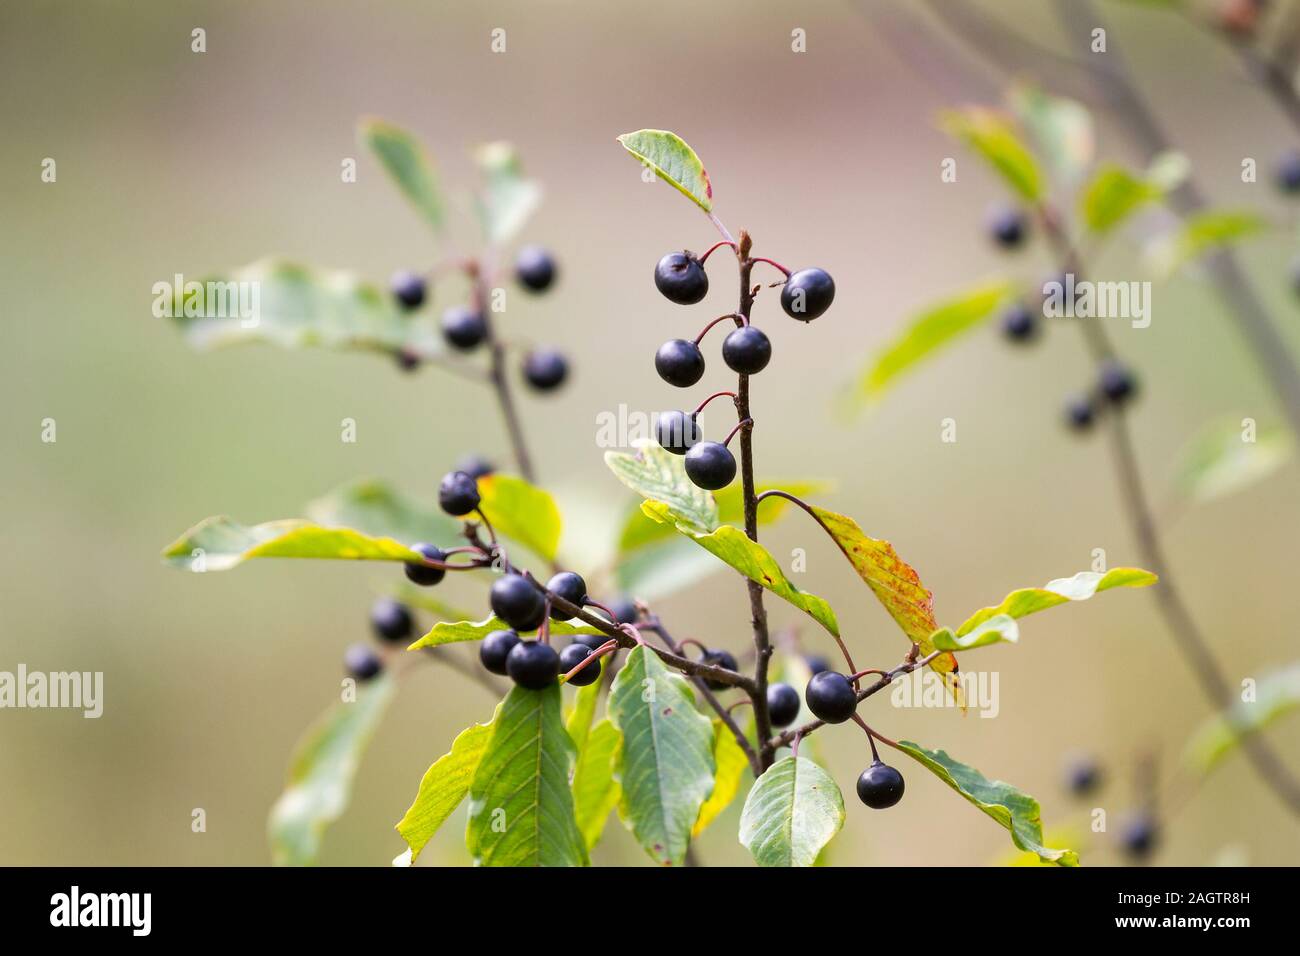 Frangula alnus, commonly known as the alder buckthorn, glossy buckthorn, or breaking buckthorn   in natural environment. Stock Photo